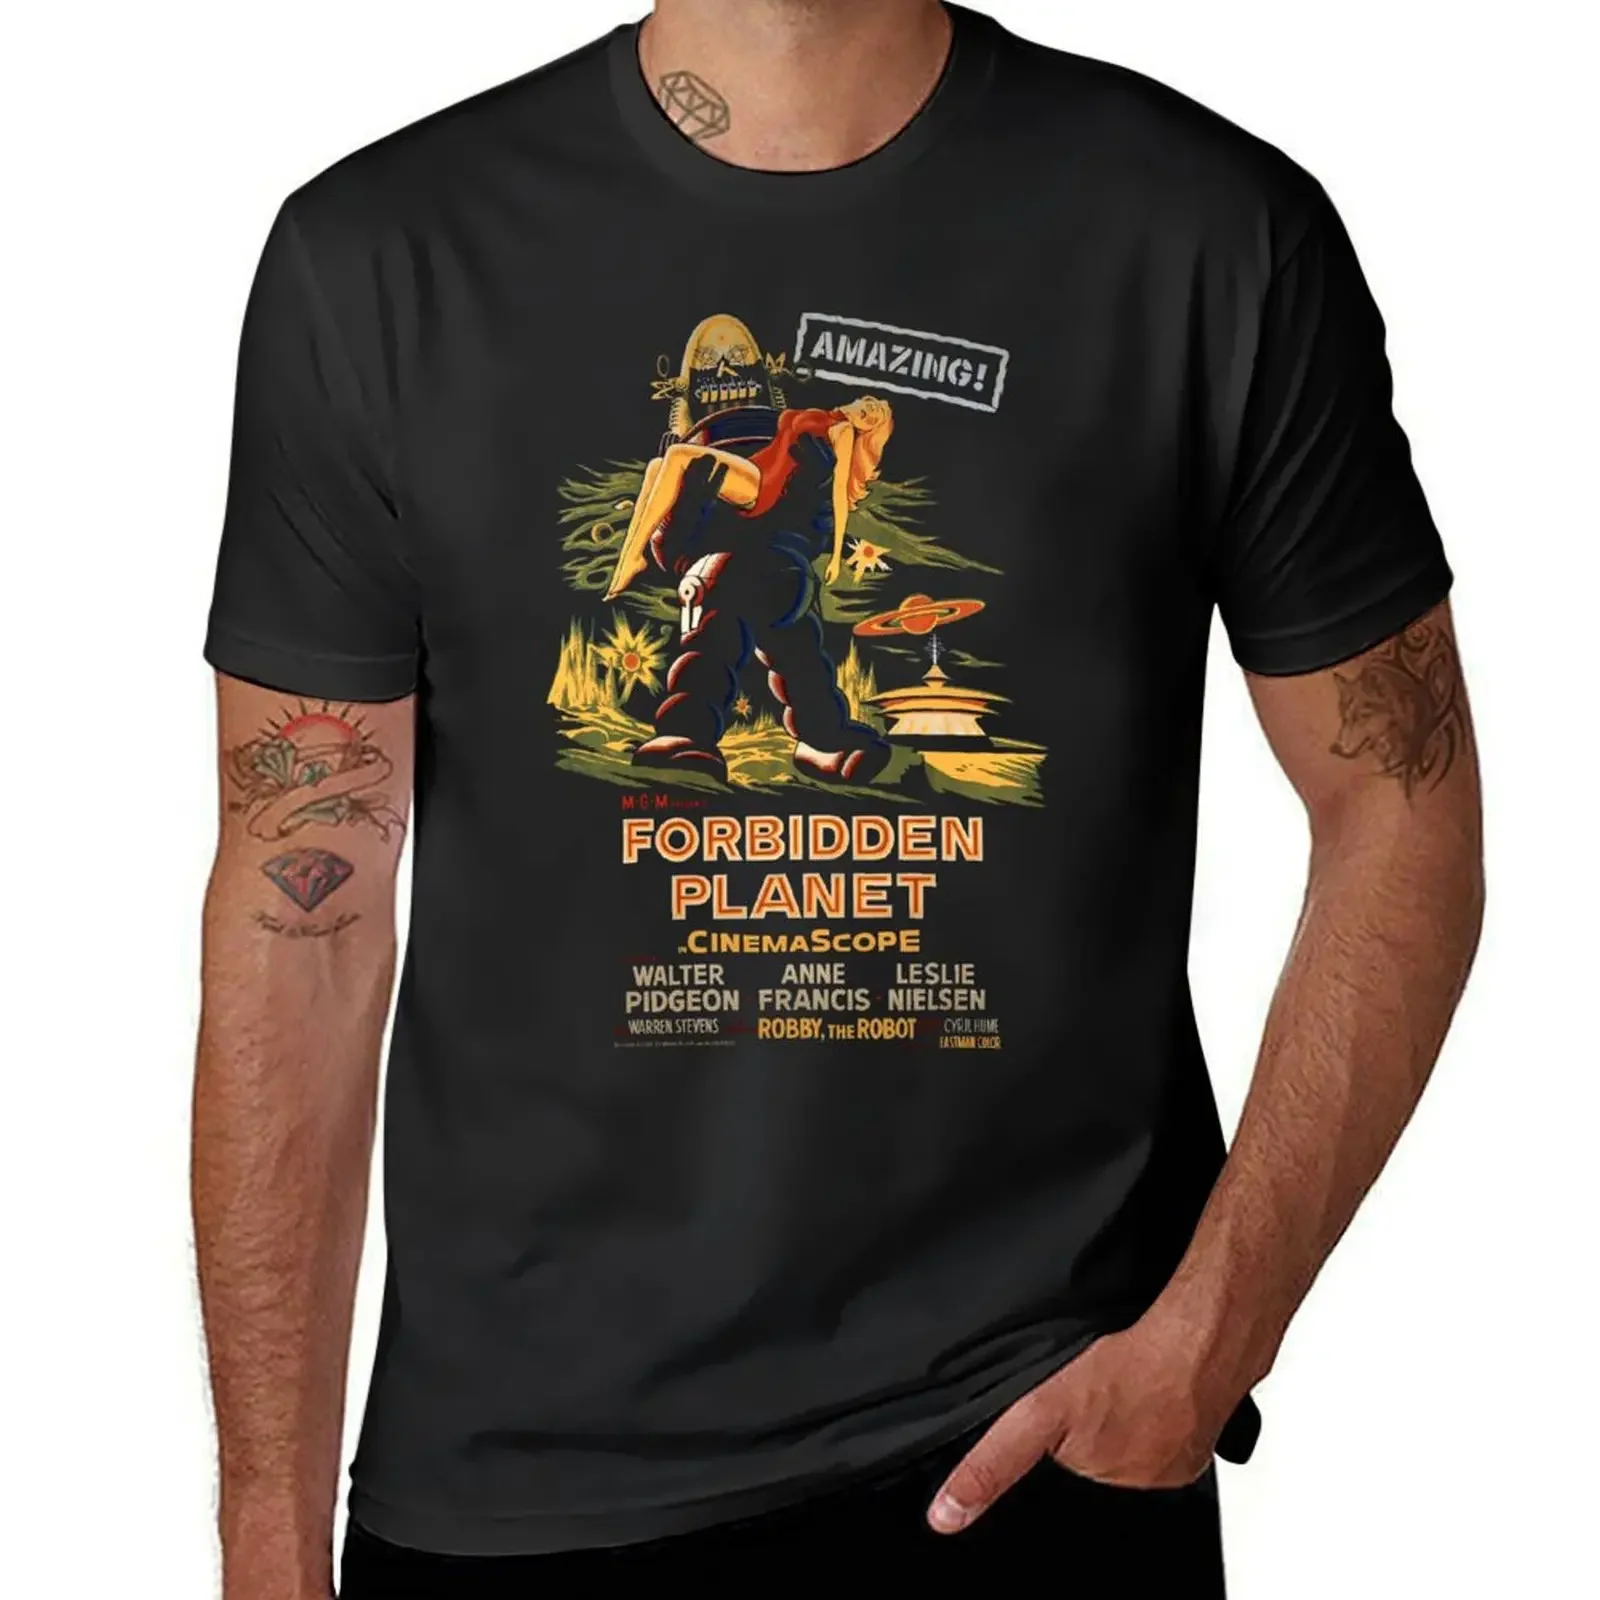 

Forbidden Planet Poster T-Shirt Blouse sublime summer clothes mens t shirts